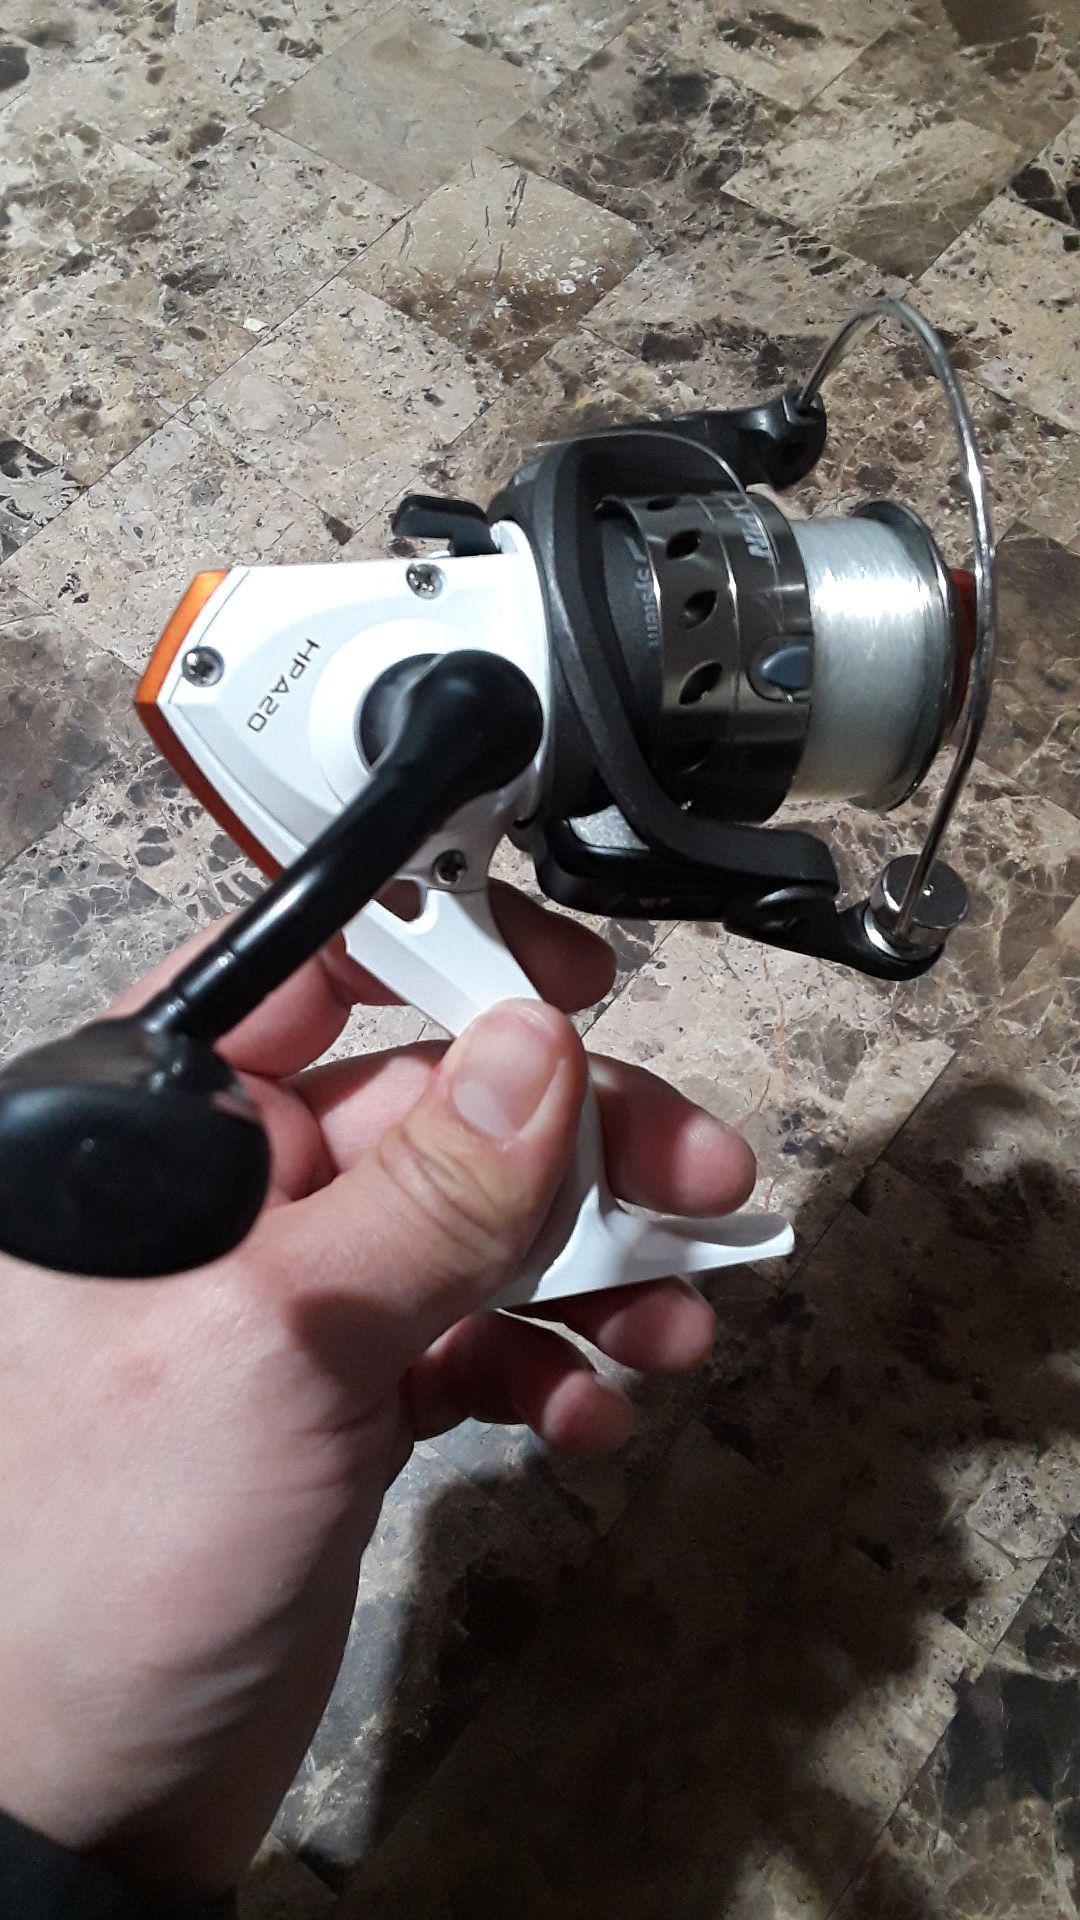 Lews speed spin HPA20 for Sale in Hanover Park, IL - OfferUp